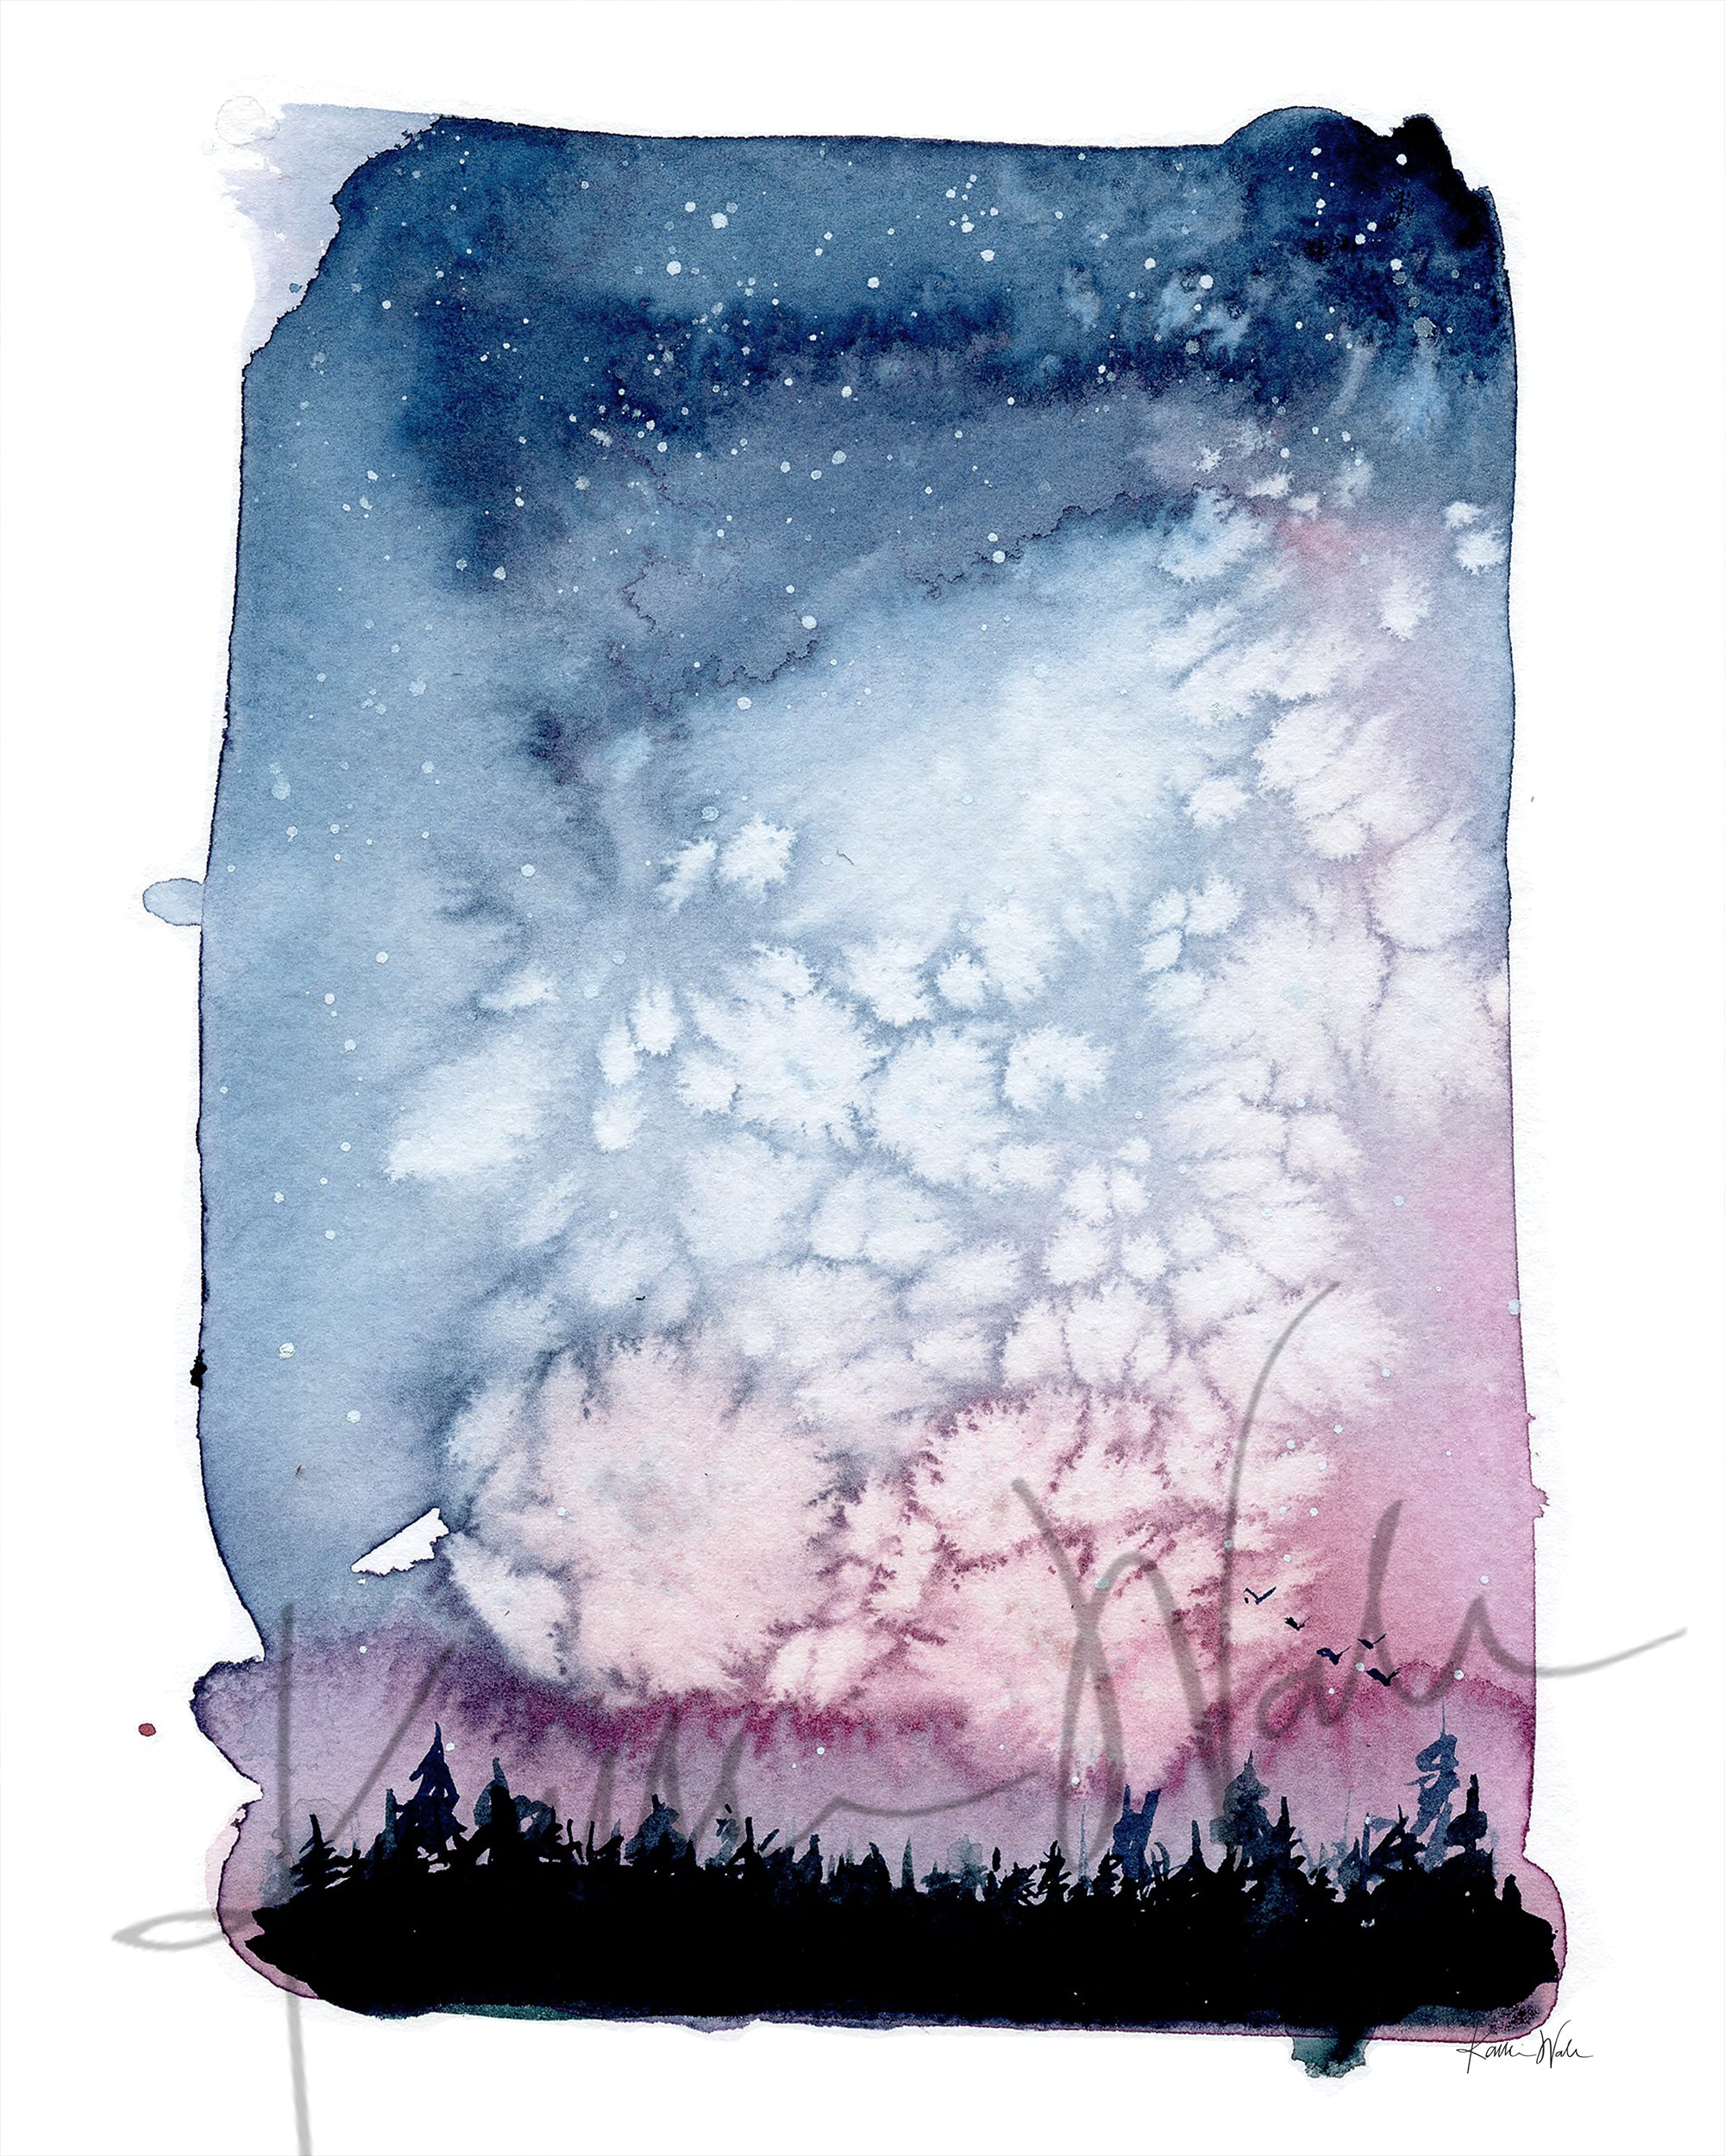 Unframed watercolor painting of a beautiful night sky with silhouetted trees.